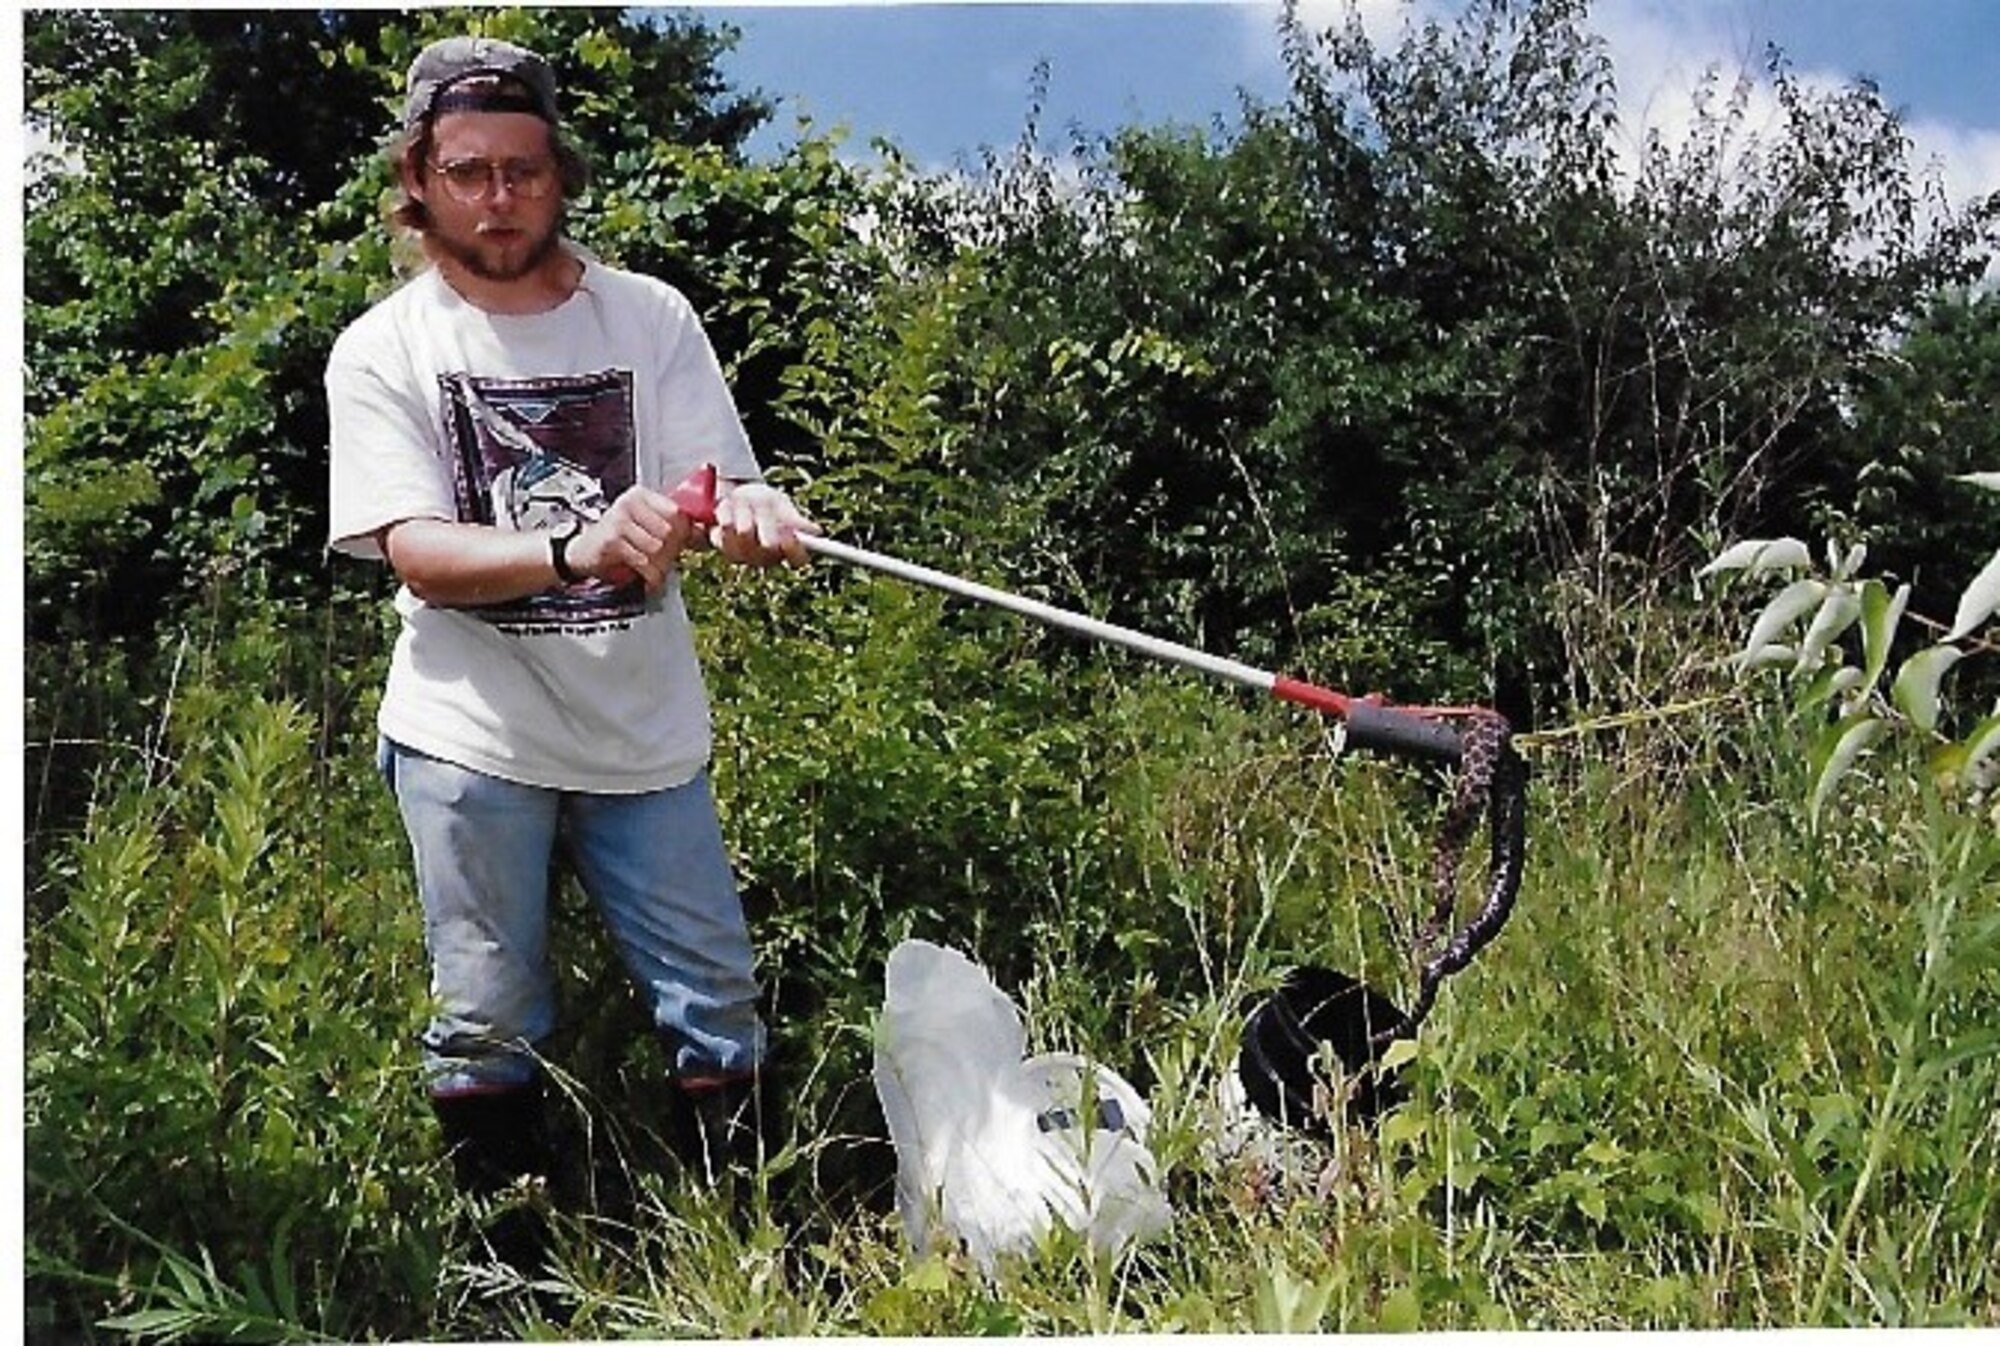 Greg Colwell, a former base biologist here, is wrangling a Massasauga snake on base as part of a survey from an area on base known as the War Fighter Training Center. (Courtesy photo)